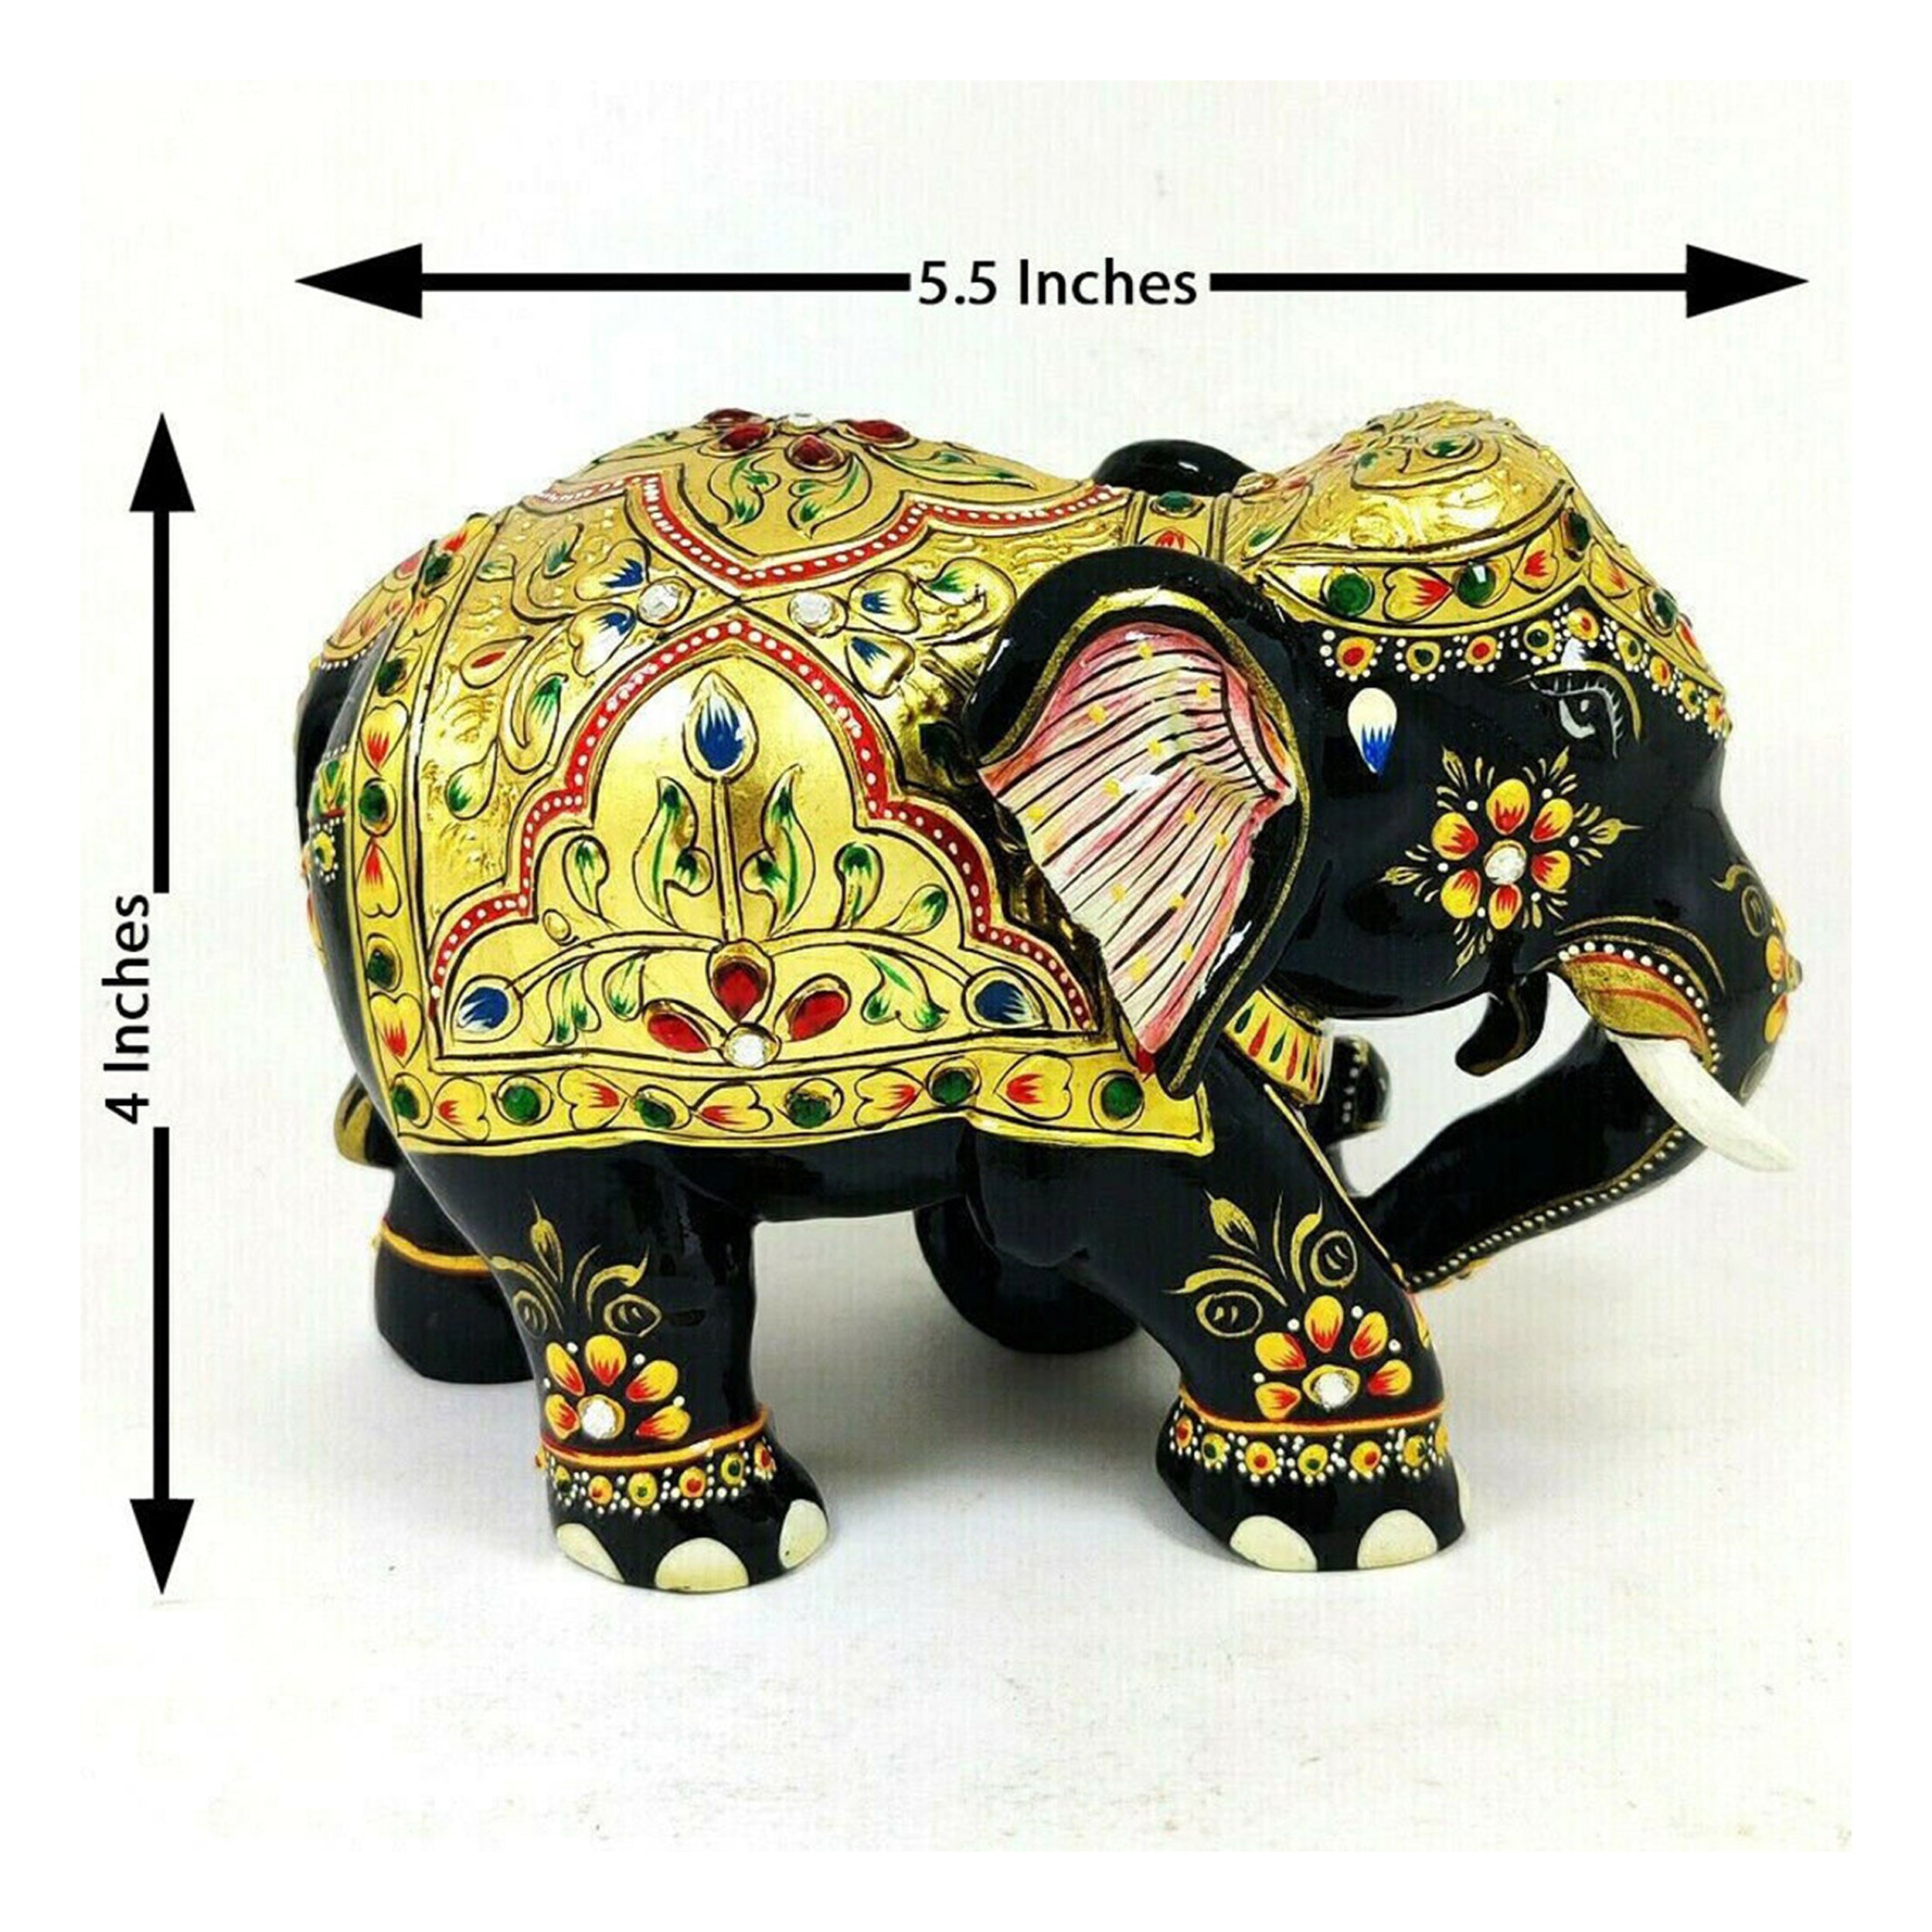 Gift a piece of art with Hand-Painted Wooden Elephant Statue